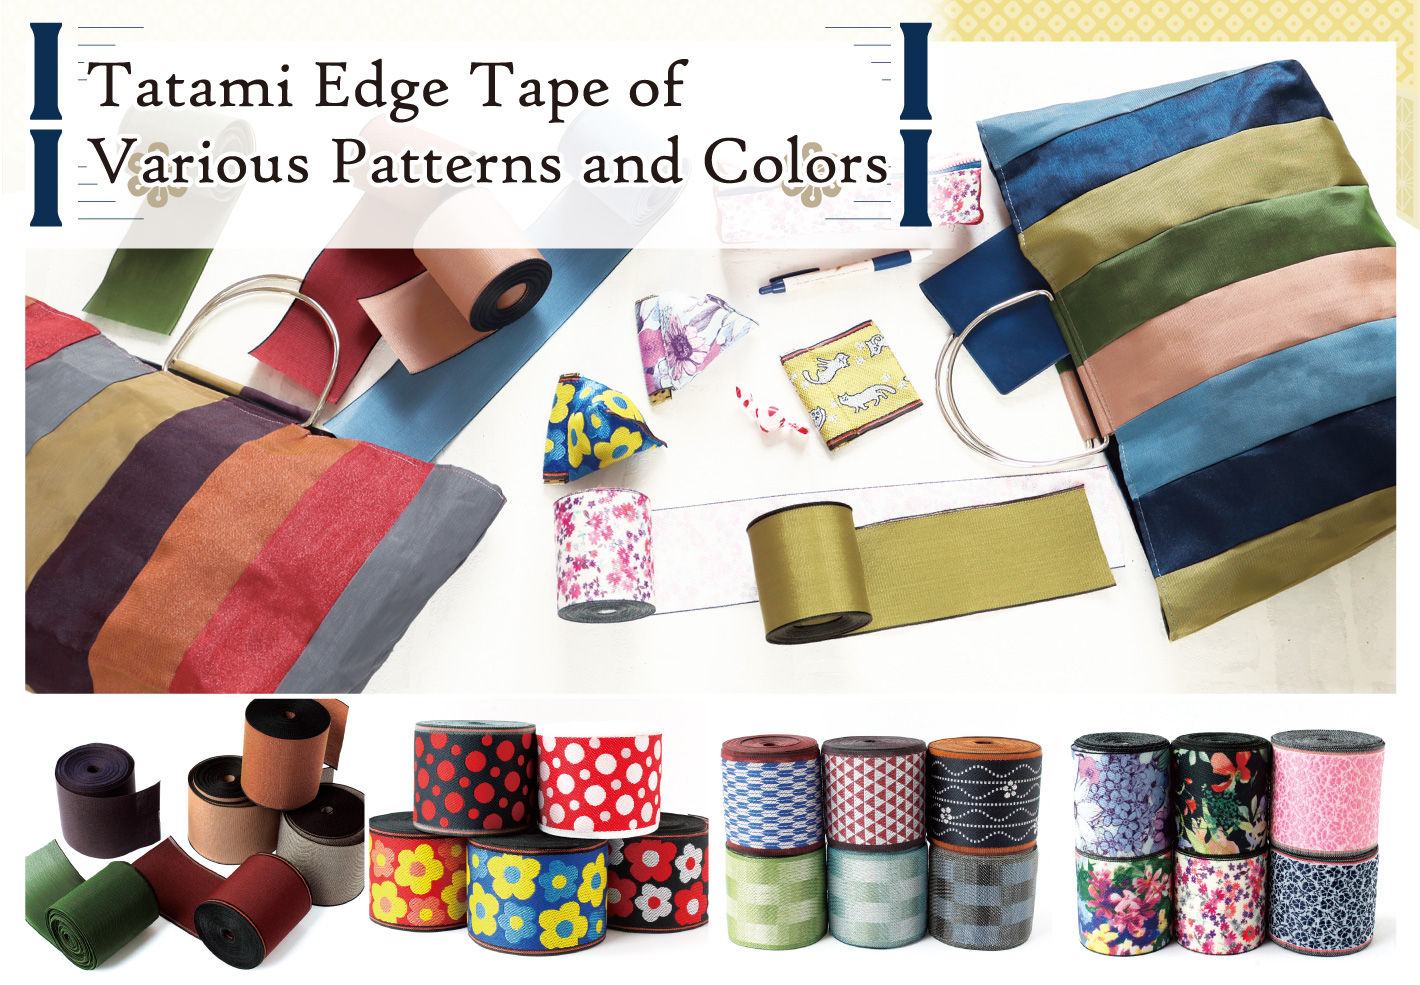 Fun with colors and patterns-Tatami edge